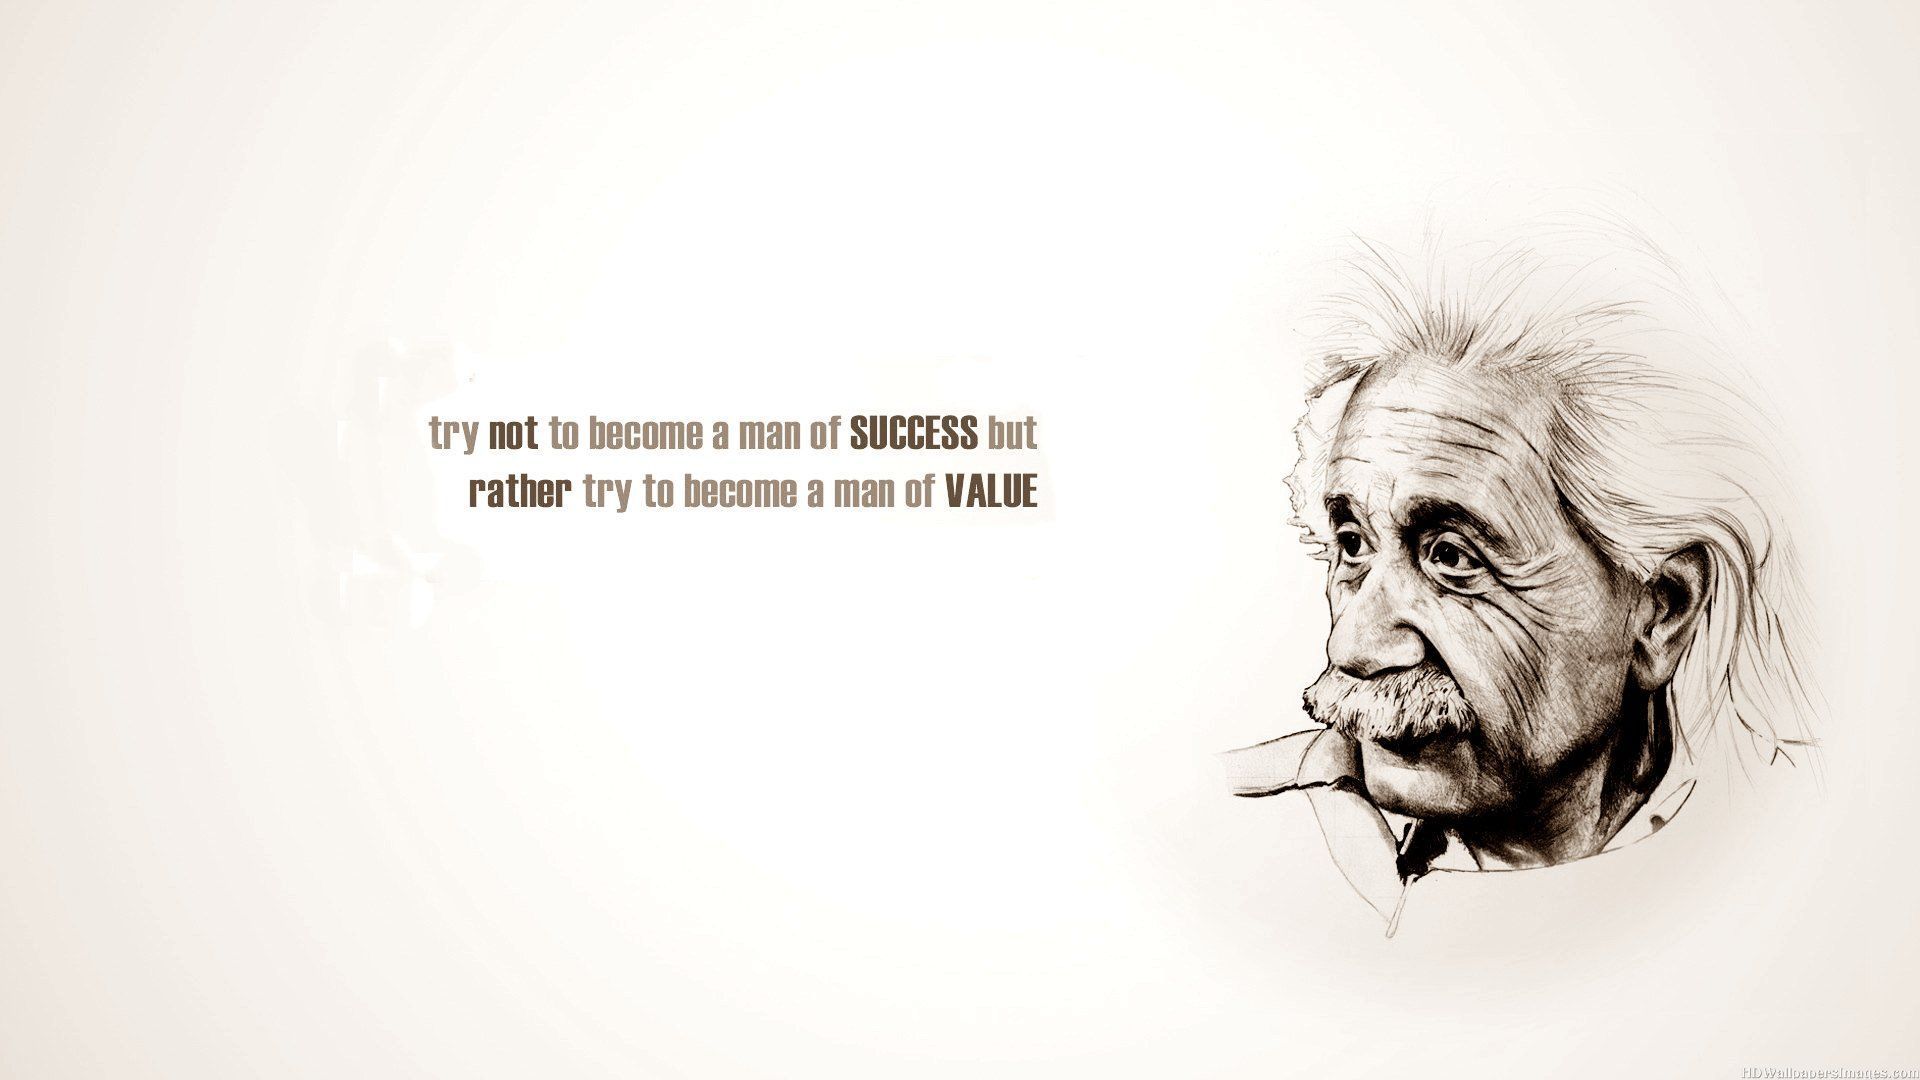 Try Not To Become A Man Of #Success But Rather Try To Become A Man Of Value #Quote By: #Albert. Einstein quotes, Success quotes image, Life quotes wallpaper